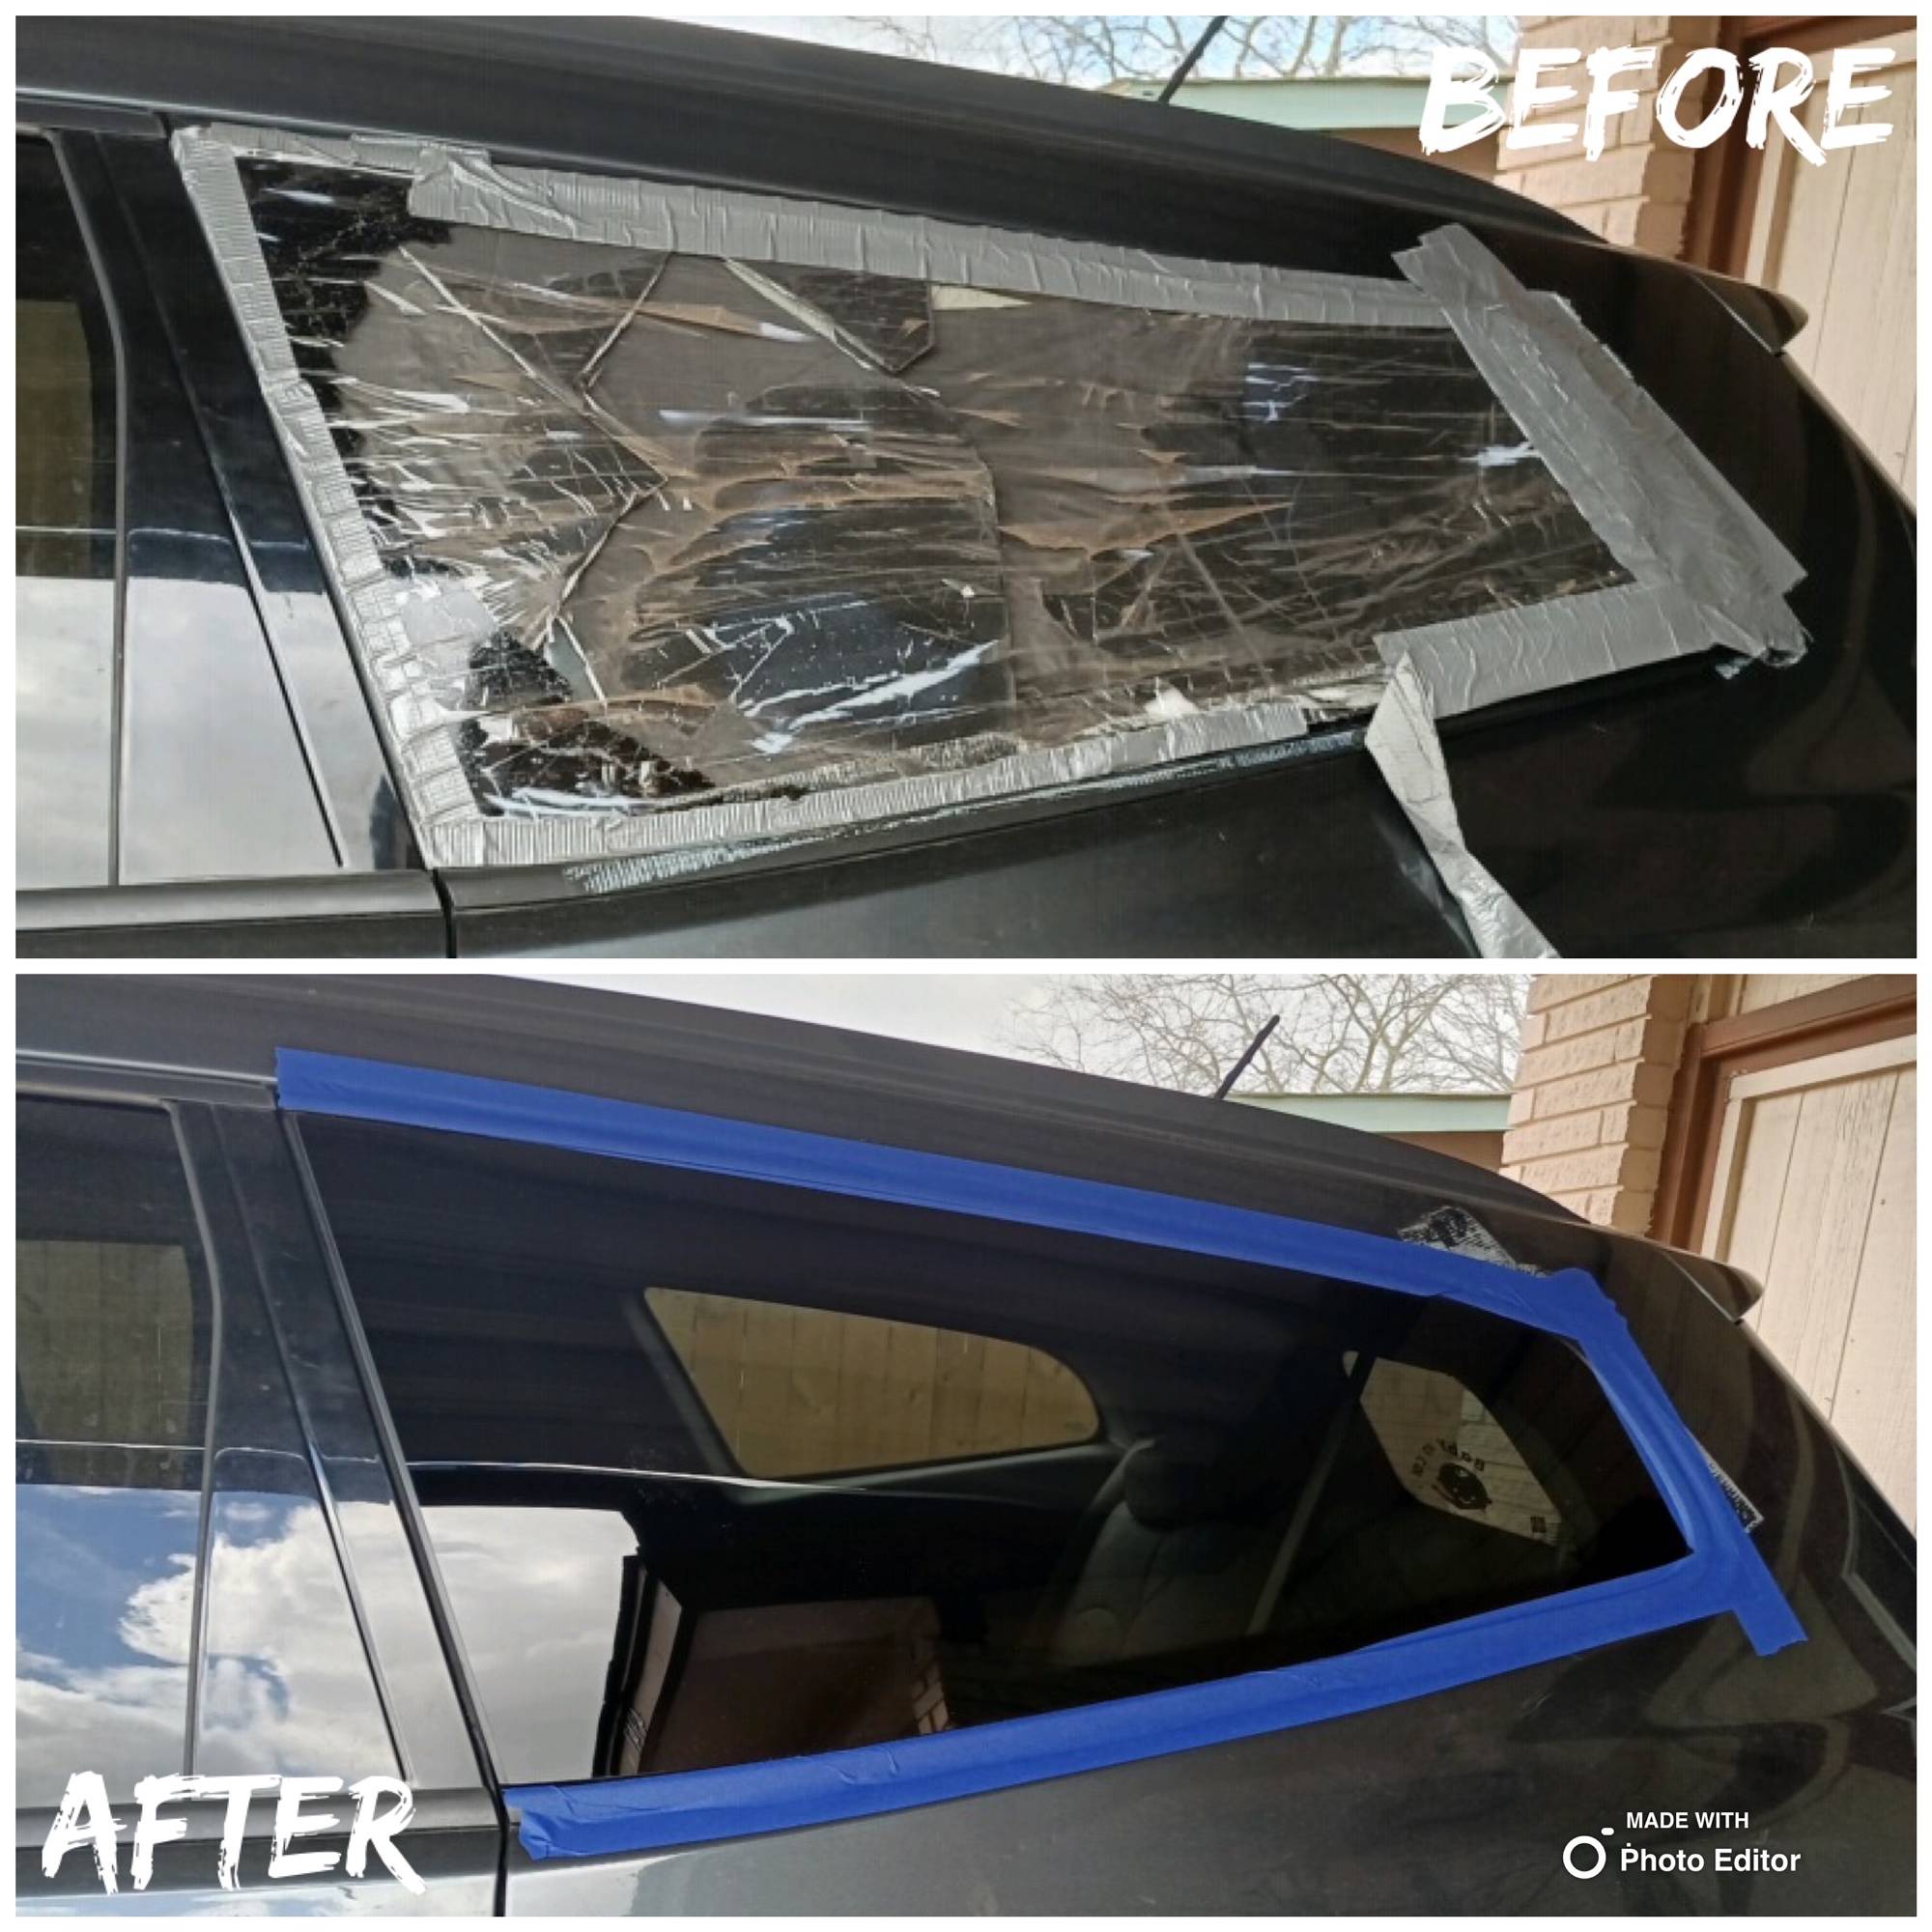 This split image captures the repair process of a dark green SUV's driver side left rear quarter glass during a home auto glass appointment at The Alamo in San Antonio, Texas. The top half displays the broken-out glass from an accident, while the bottom half demonstrates the expertly replaced factory privacy tinted quarter glass, returning the vehicle to its original state.